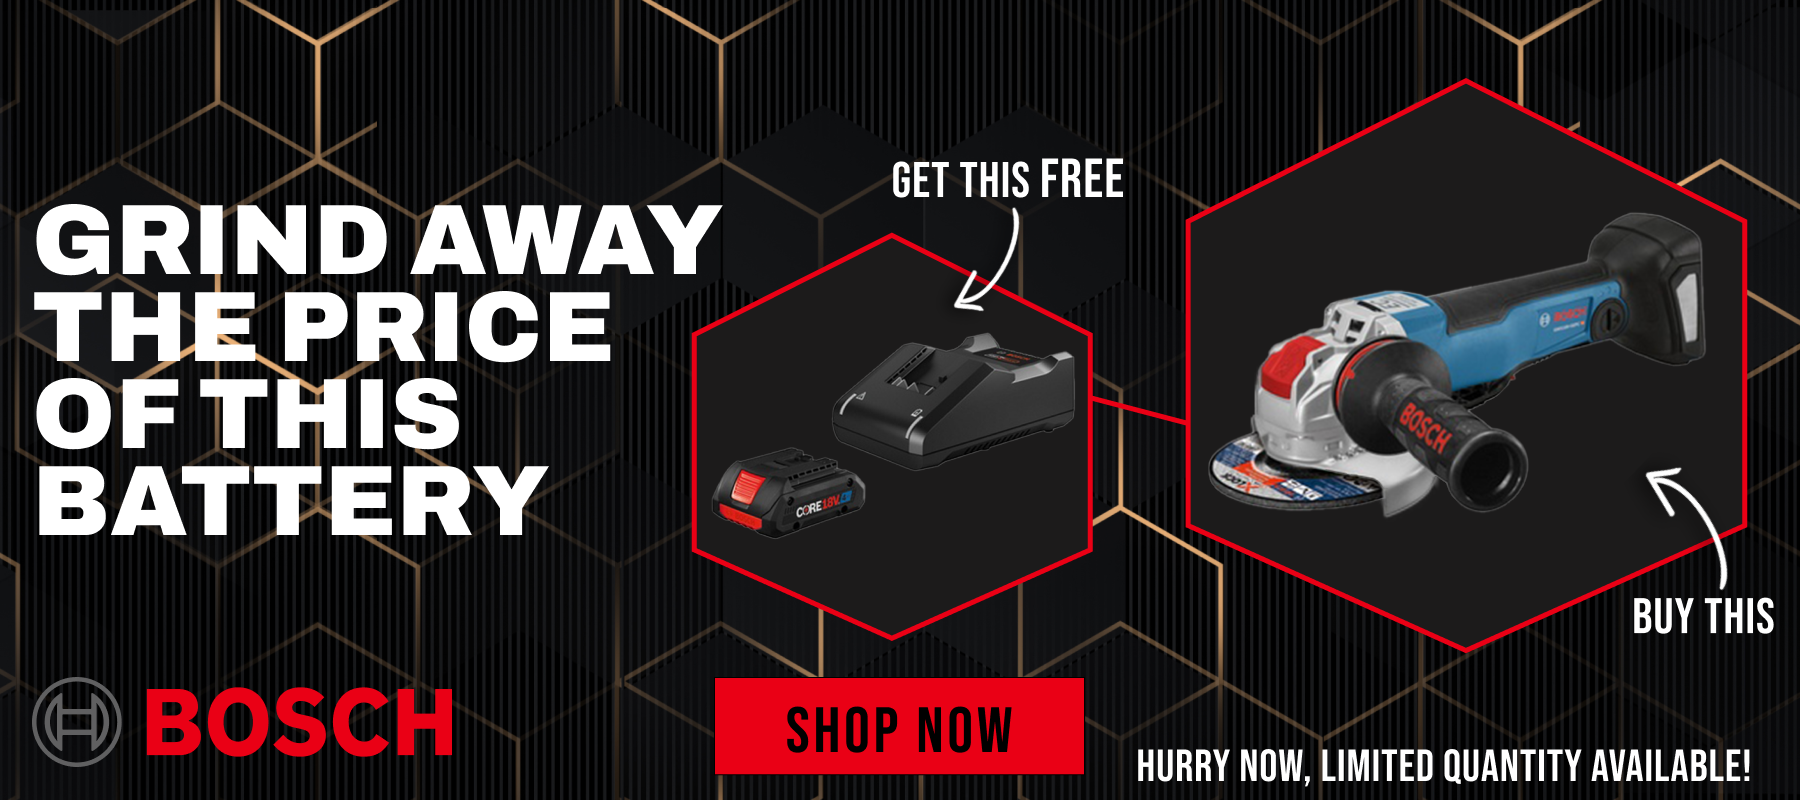 Bosch // Grind Away the Price of This Battery // Buy This, Get This Free // Hurry Now, Limited Quantity Available! // SHOP NOW